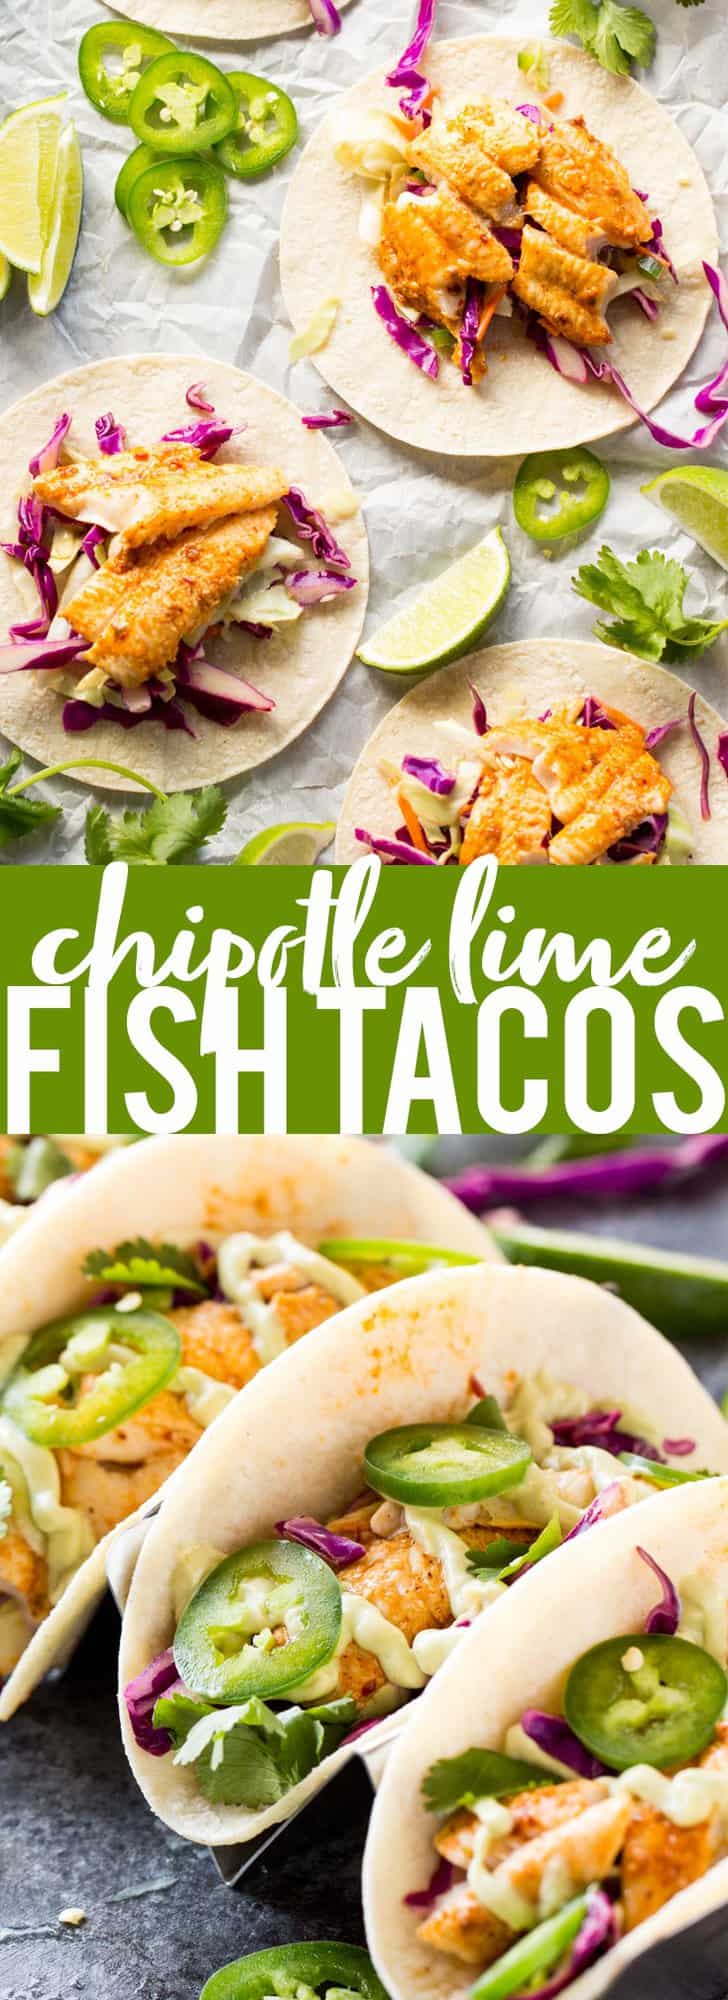 Chipotle Lime Fish Tacos with crunchy jalapeno lime slaw and creamy avocado crema are an easy and flavorful weeknight dinner! Taco Recipe | Baja Fish Tacos | Spicy Fish Tacos | Fish Recipes | Cinco De Mayo Recipes